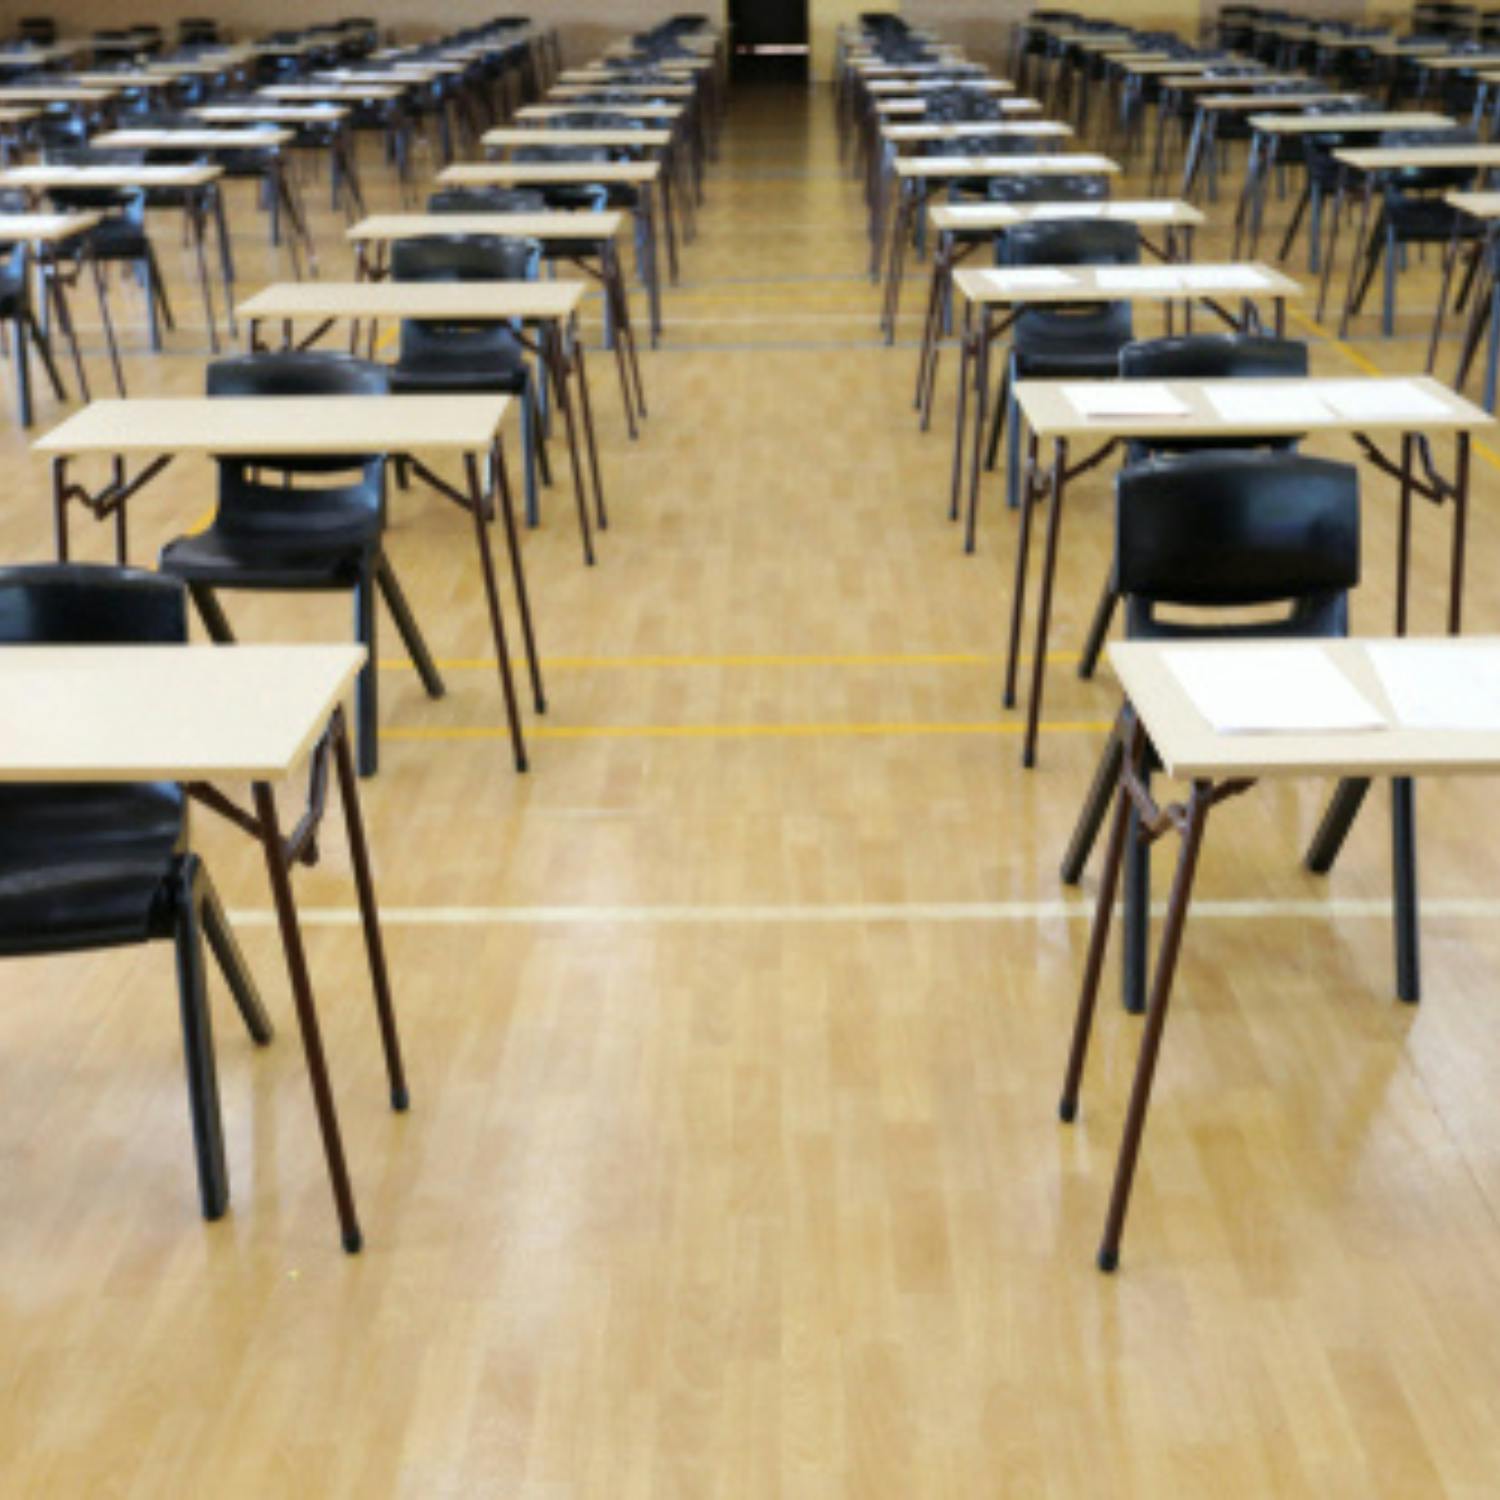 We discuss the “phased” return to normal Leaving Cert results